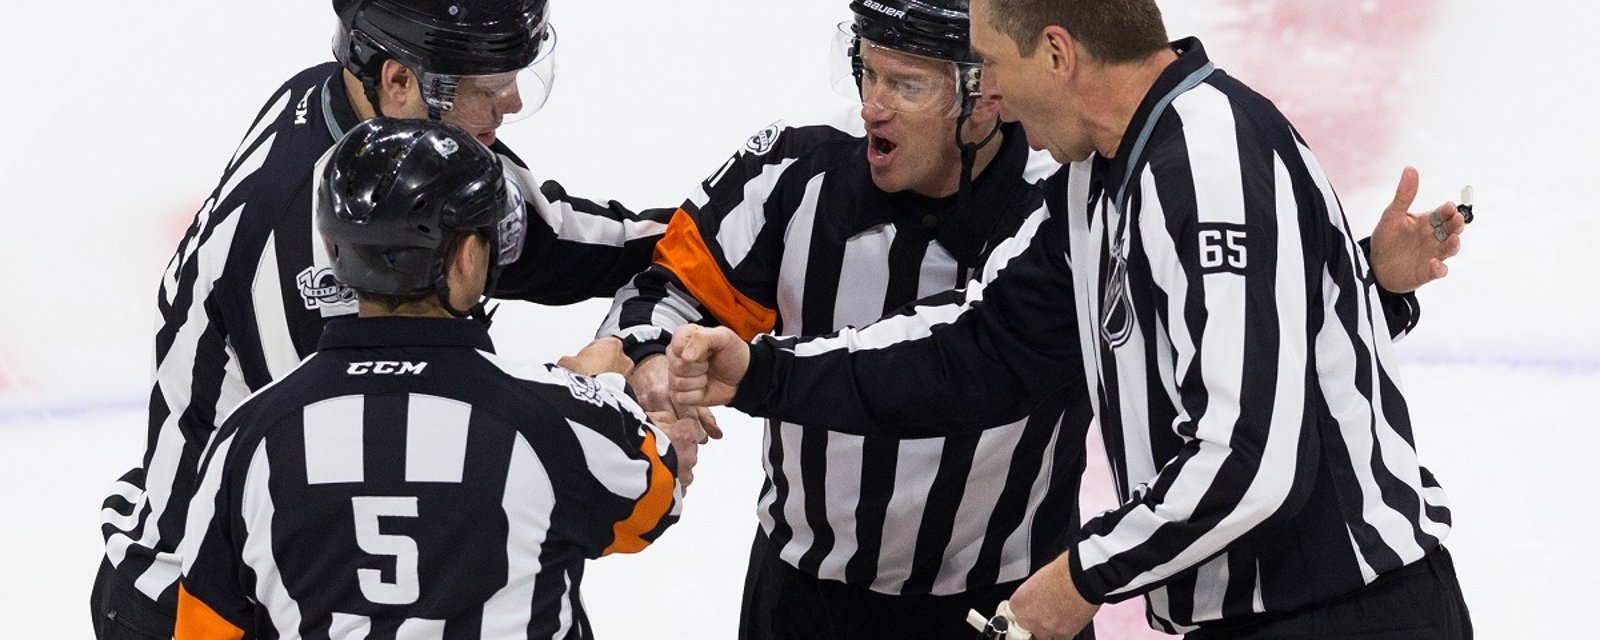 Breaking: Head coach loses it after horrible call from the NHL officials!